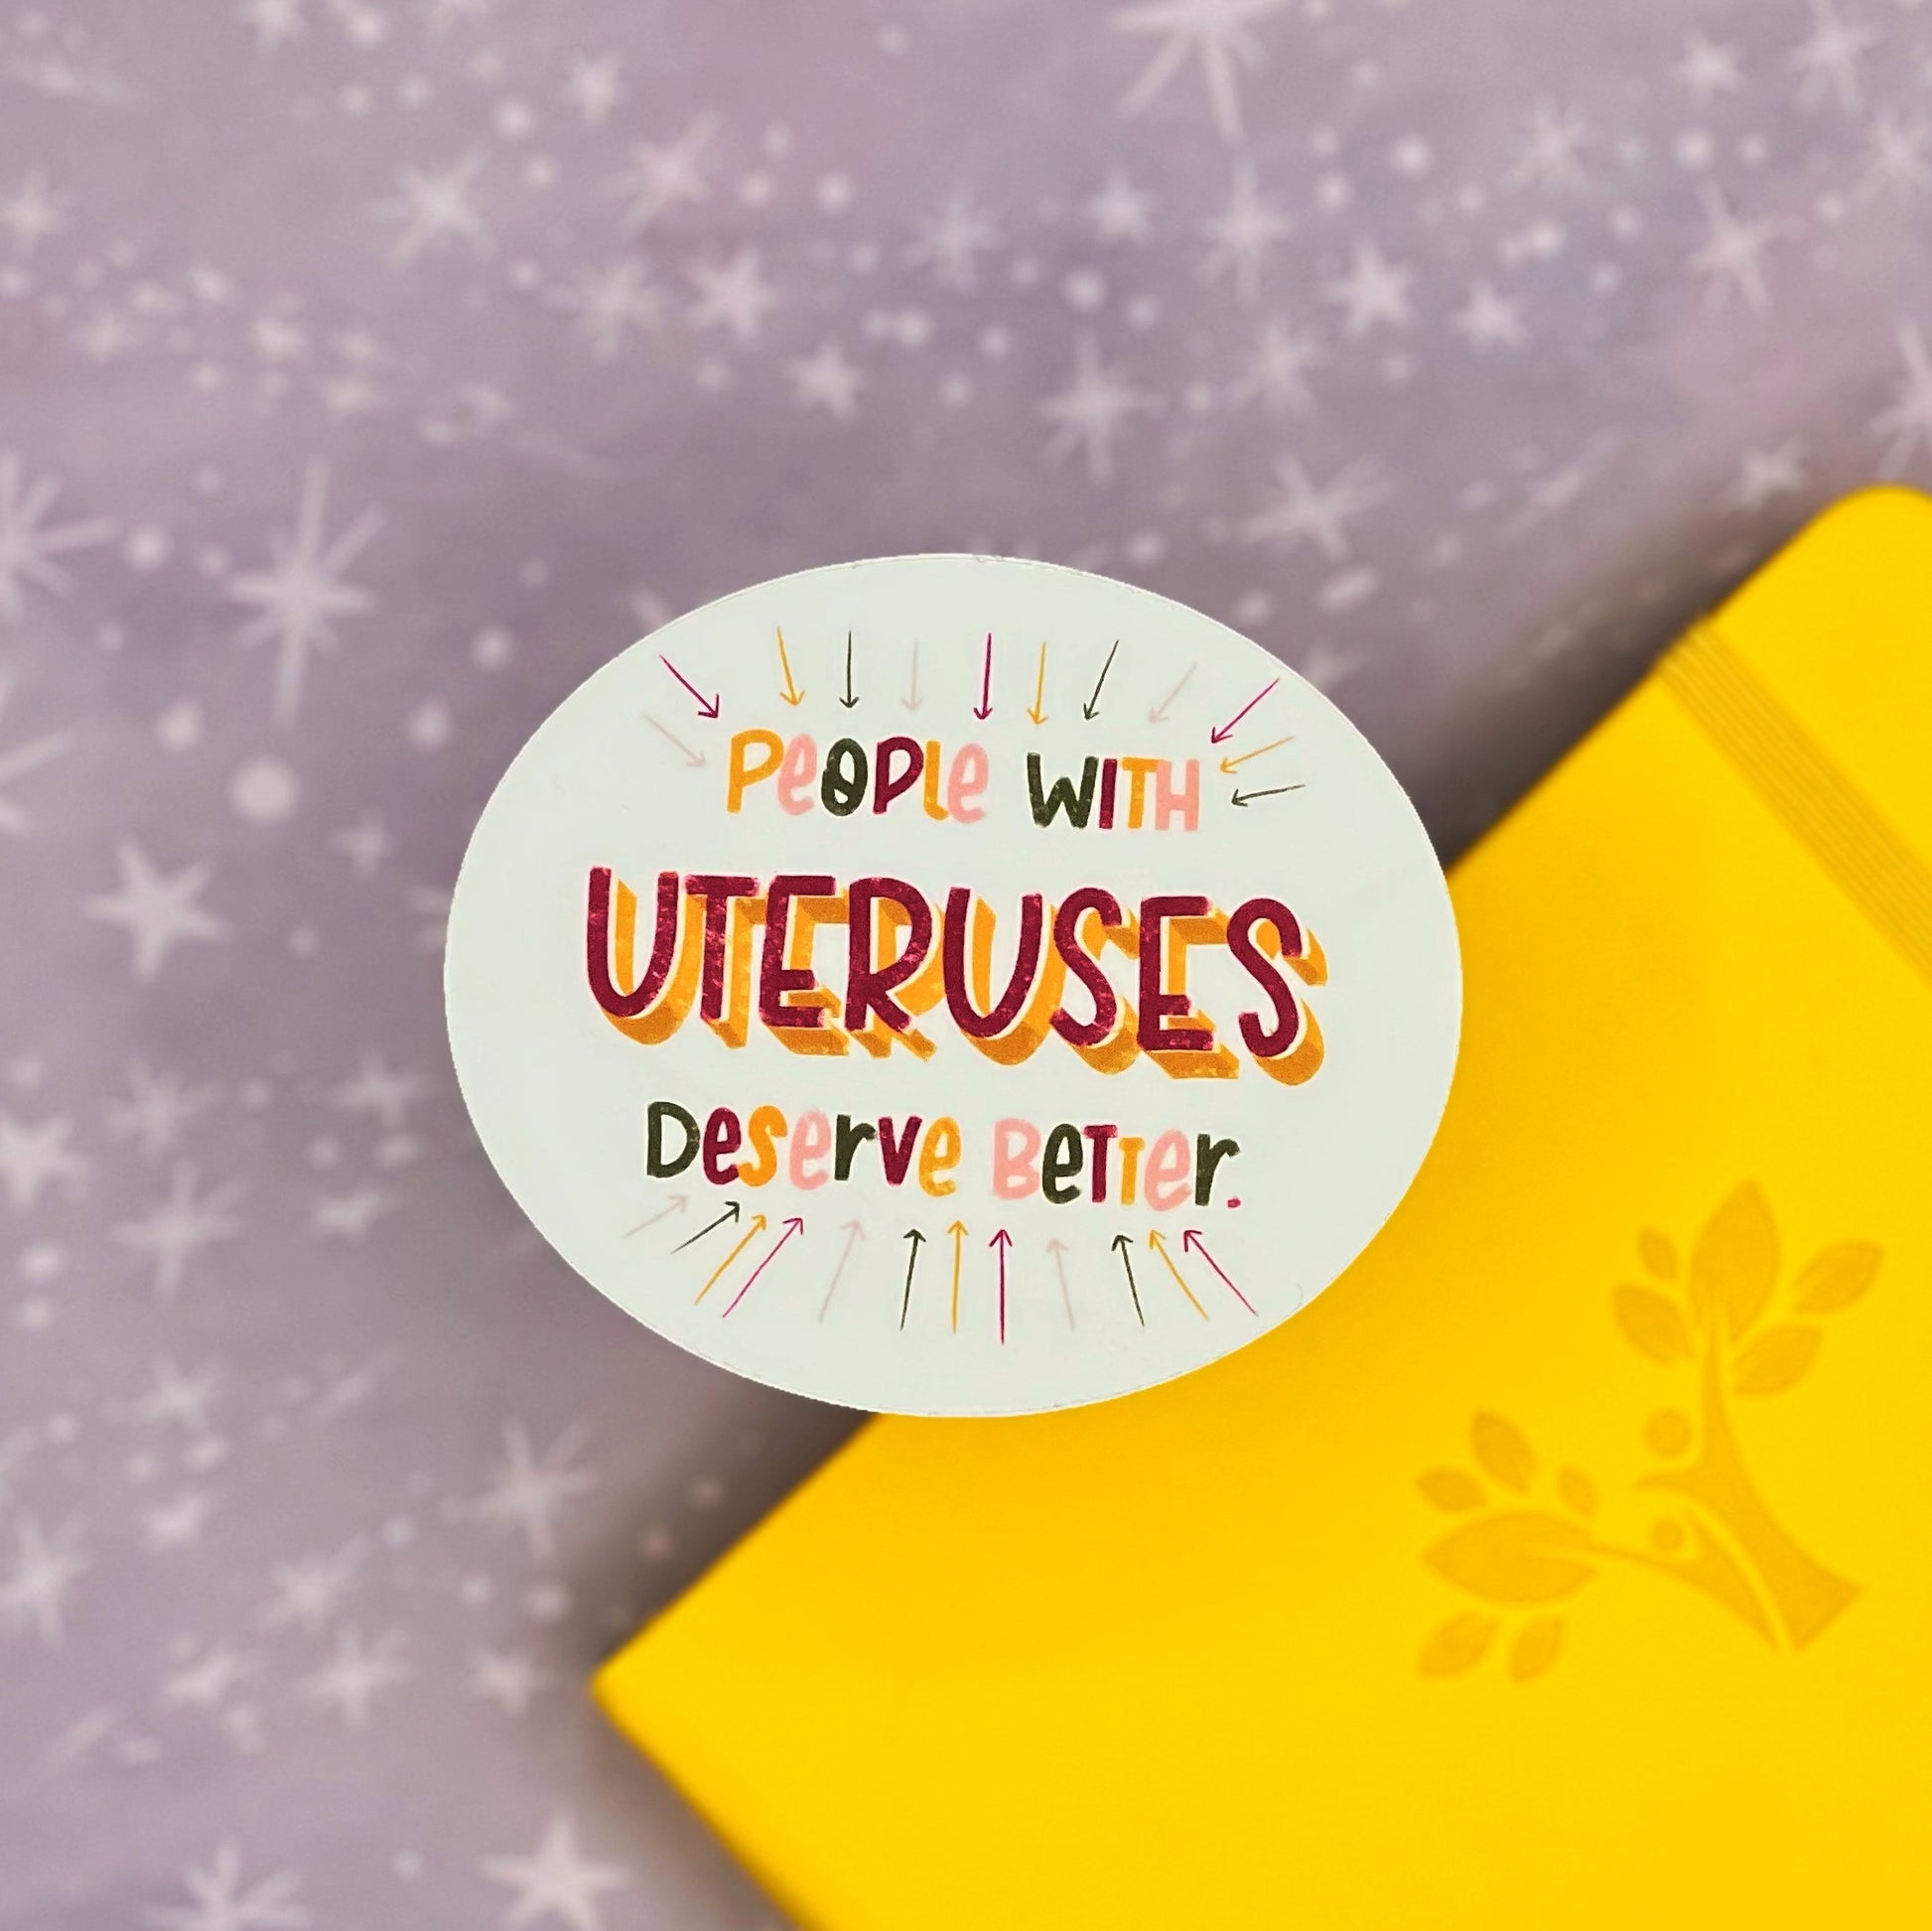 People with Uteruses Deserve Better Matte Water Resistant Sticker